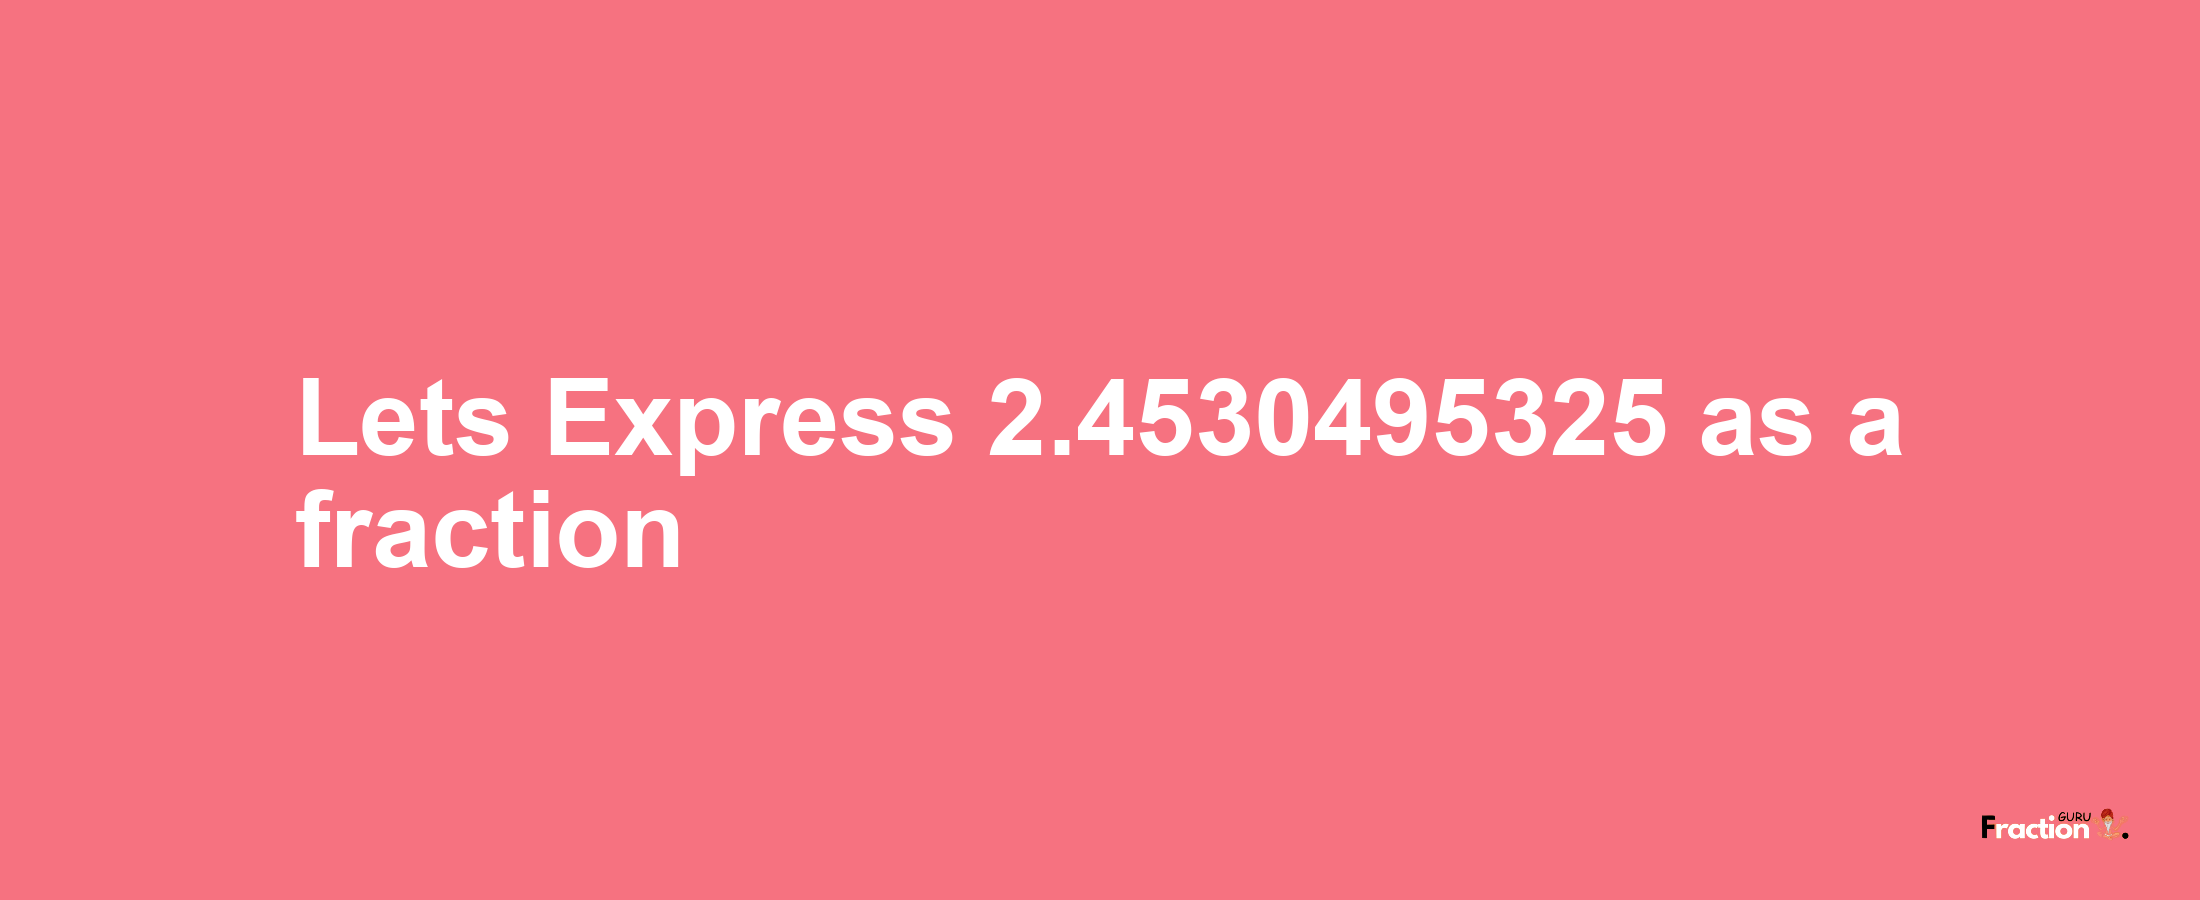 Lets Express 2.4530495325 as afraction